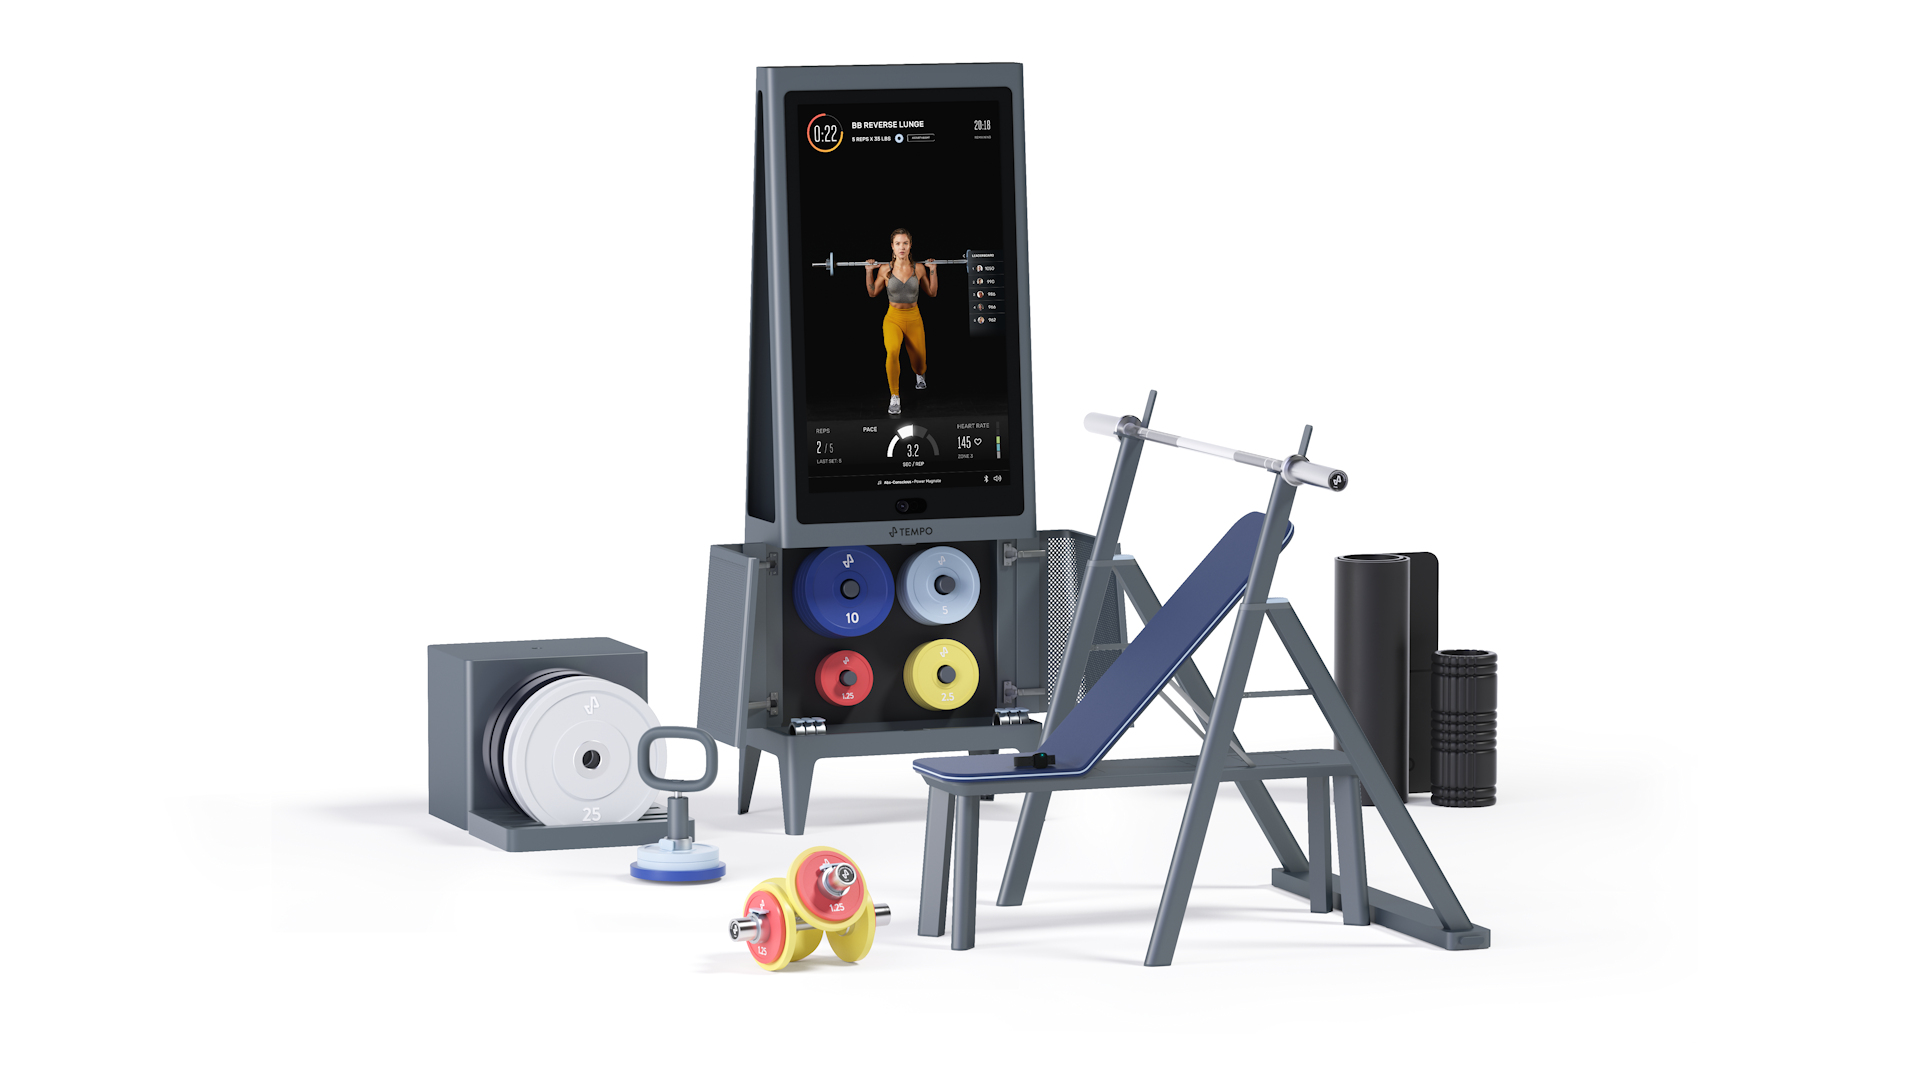 Get your own virtual personal trainer at home with the newly launched Tempo Fit